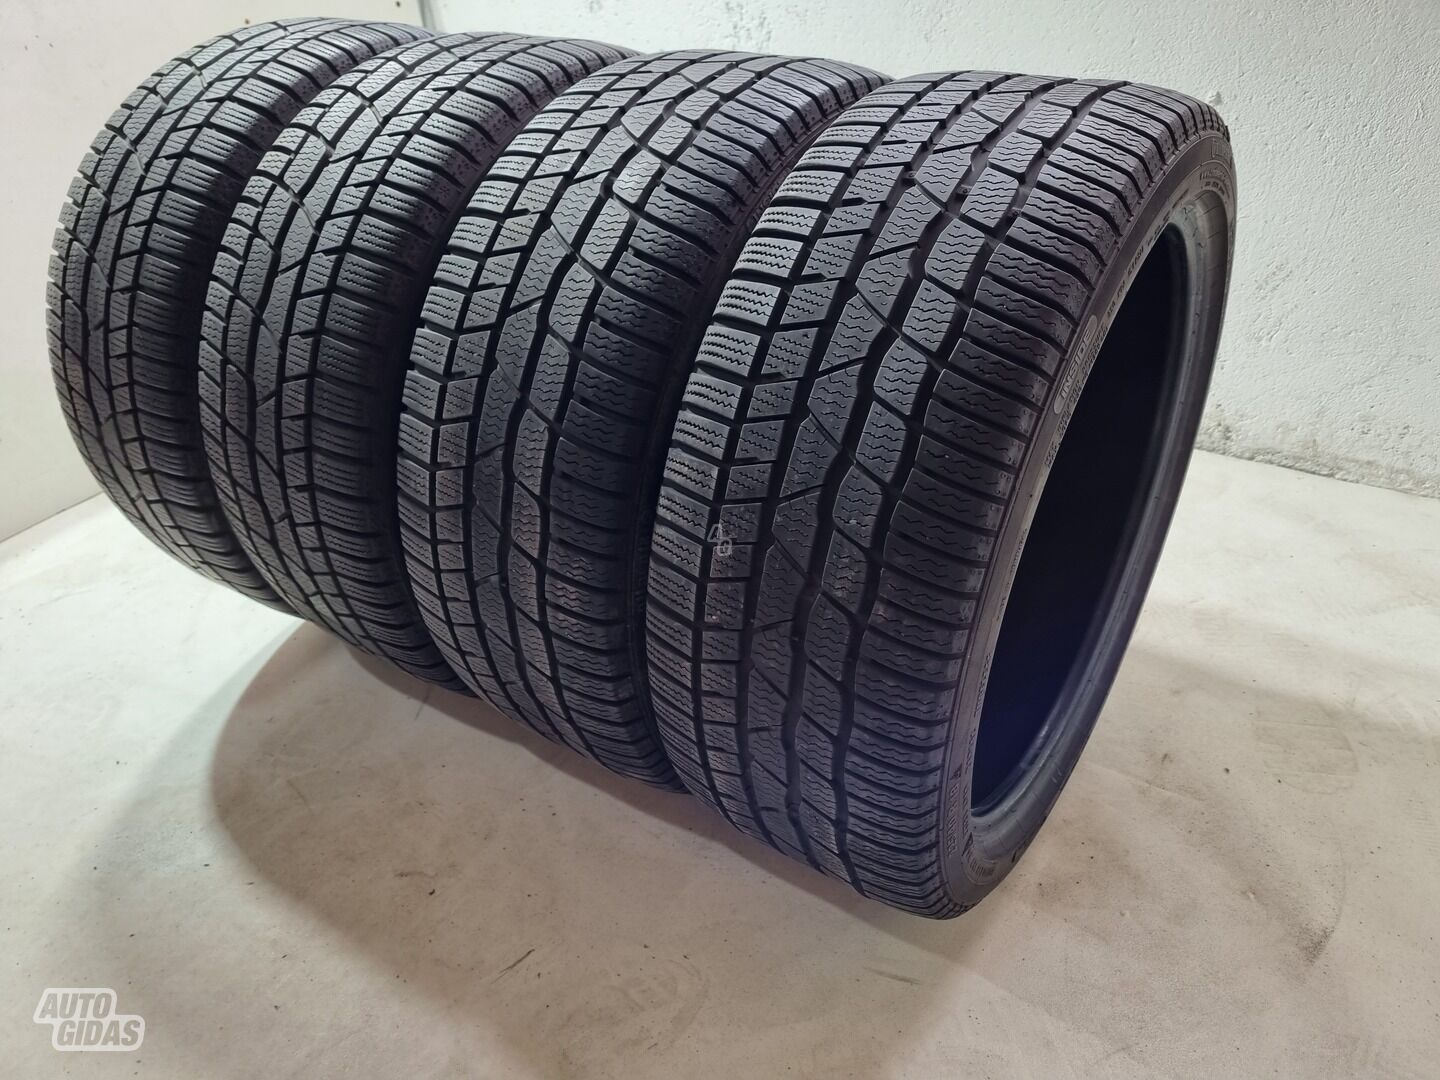 Continental 7mm, 2018m R18 universal tyres passanger car